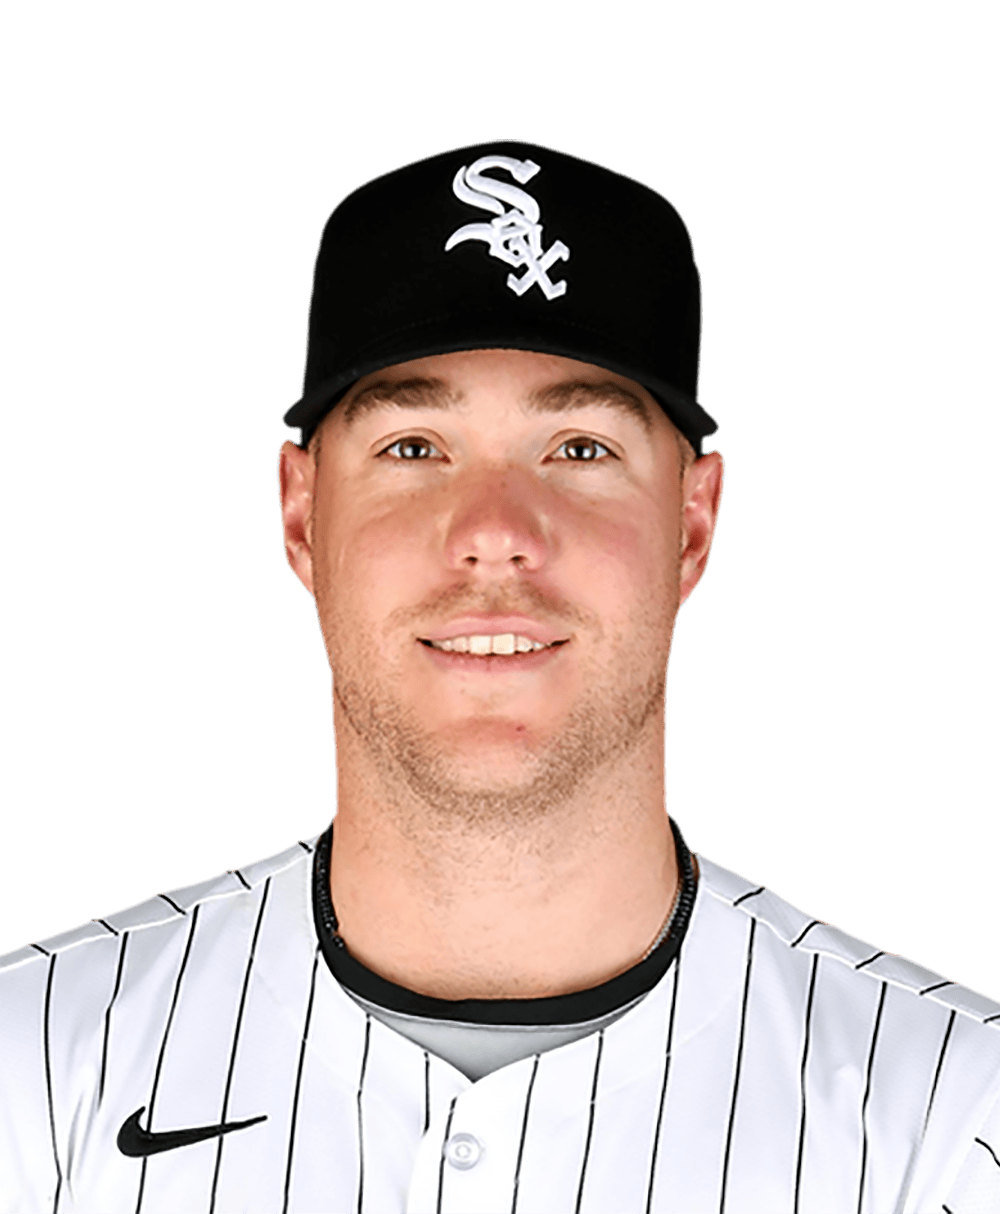 Chicago White Sox: Andrew Vaughn, Gavin Sheets keep learning